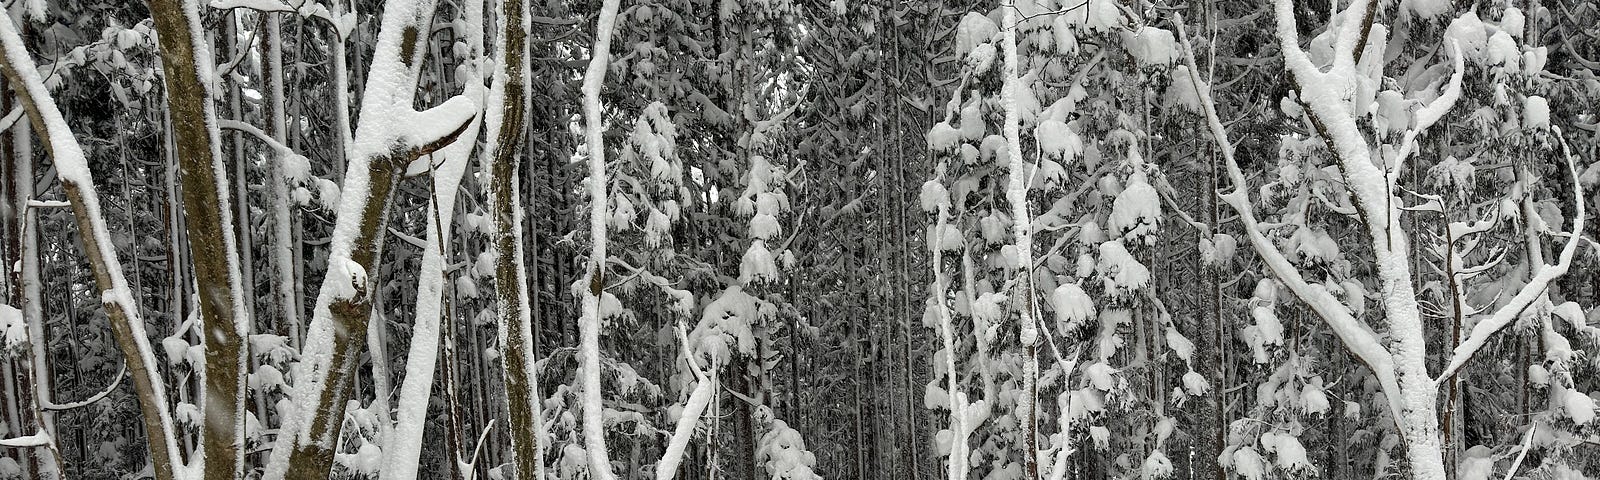 A man with a green bag cover enters a dark cedar forest completely enveloped in snow on Shirotaro-yama, Oguni-machi, Yamagata Prefecture, Japan.